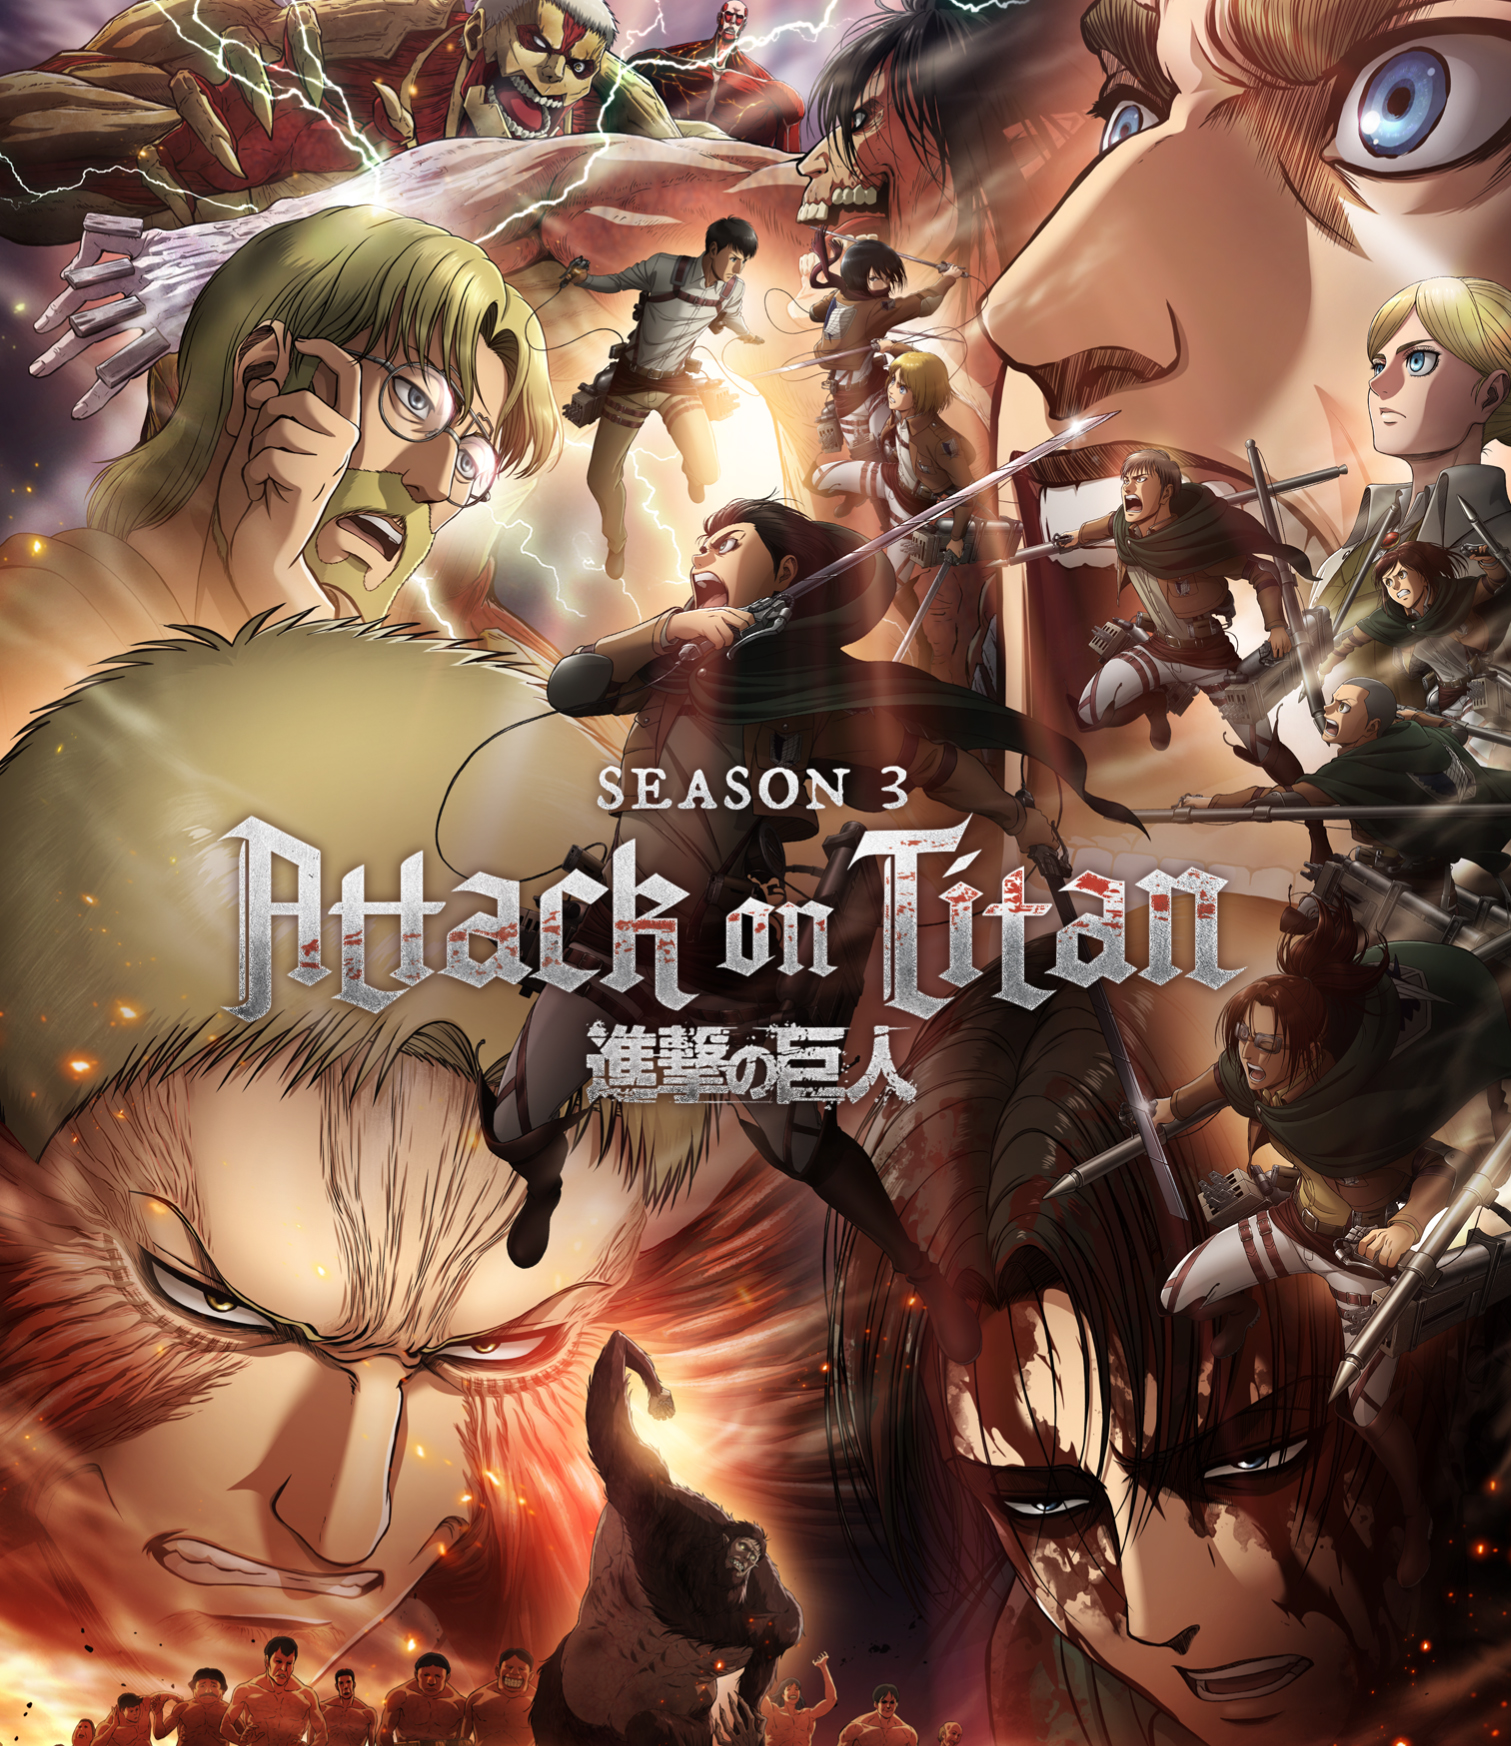 Attack on Titan - Online TV Stats, Ratings, Viewership 